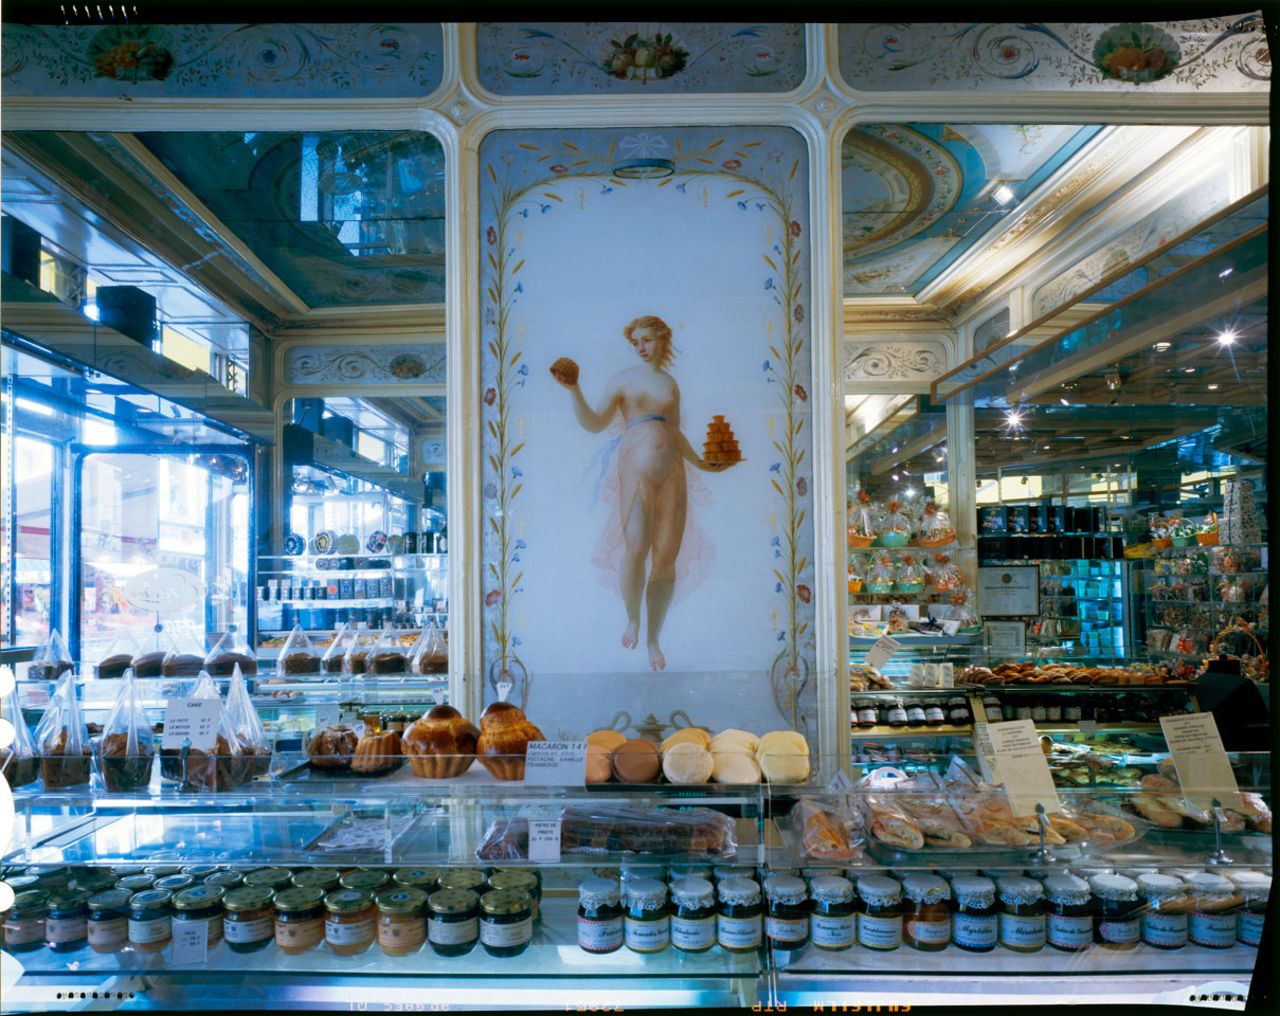 Another royalty-linked pastry purveyor, La Maison Stohrer was founded in Paris in 1730 by a Polish chef who once cooked for the wife of Louis XV.